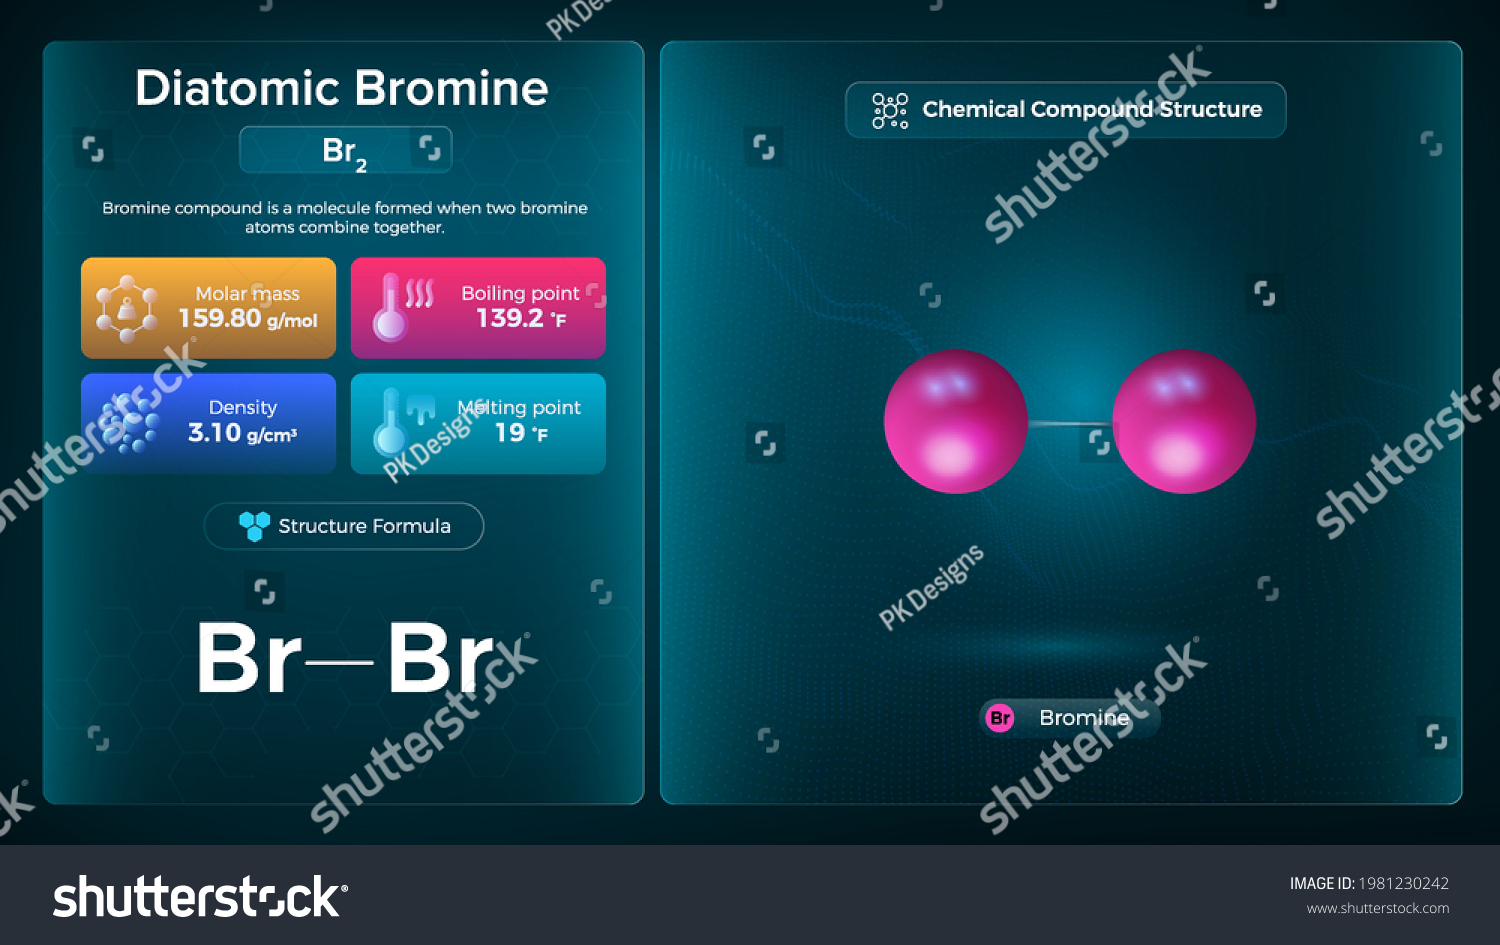 Diatomic Bromine Properties Chemical Compound Structure Stock Vector ...